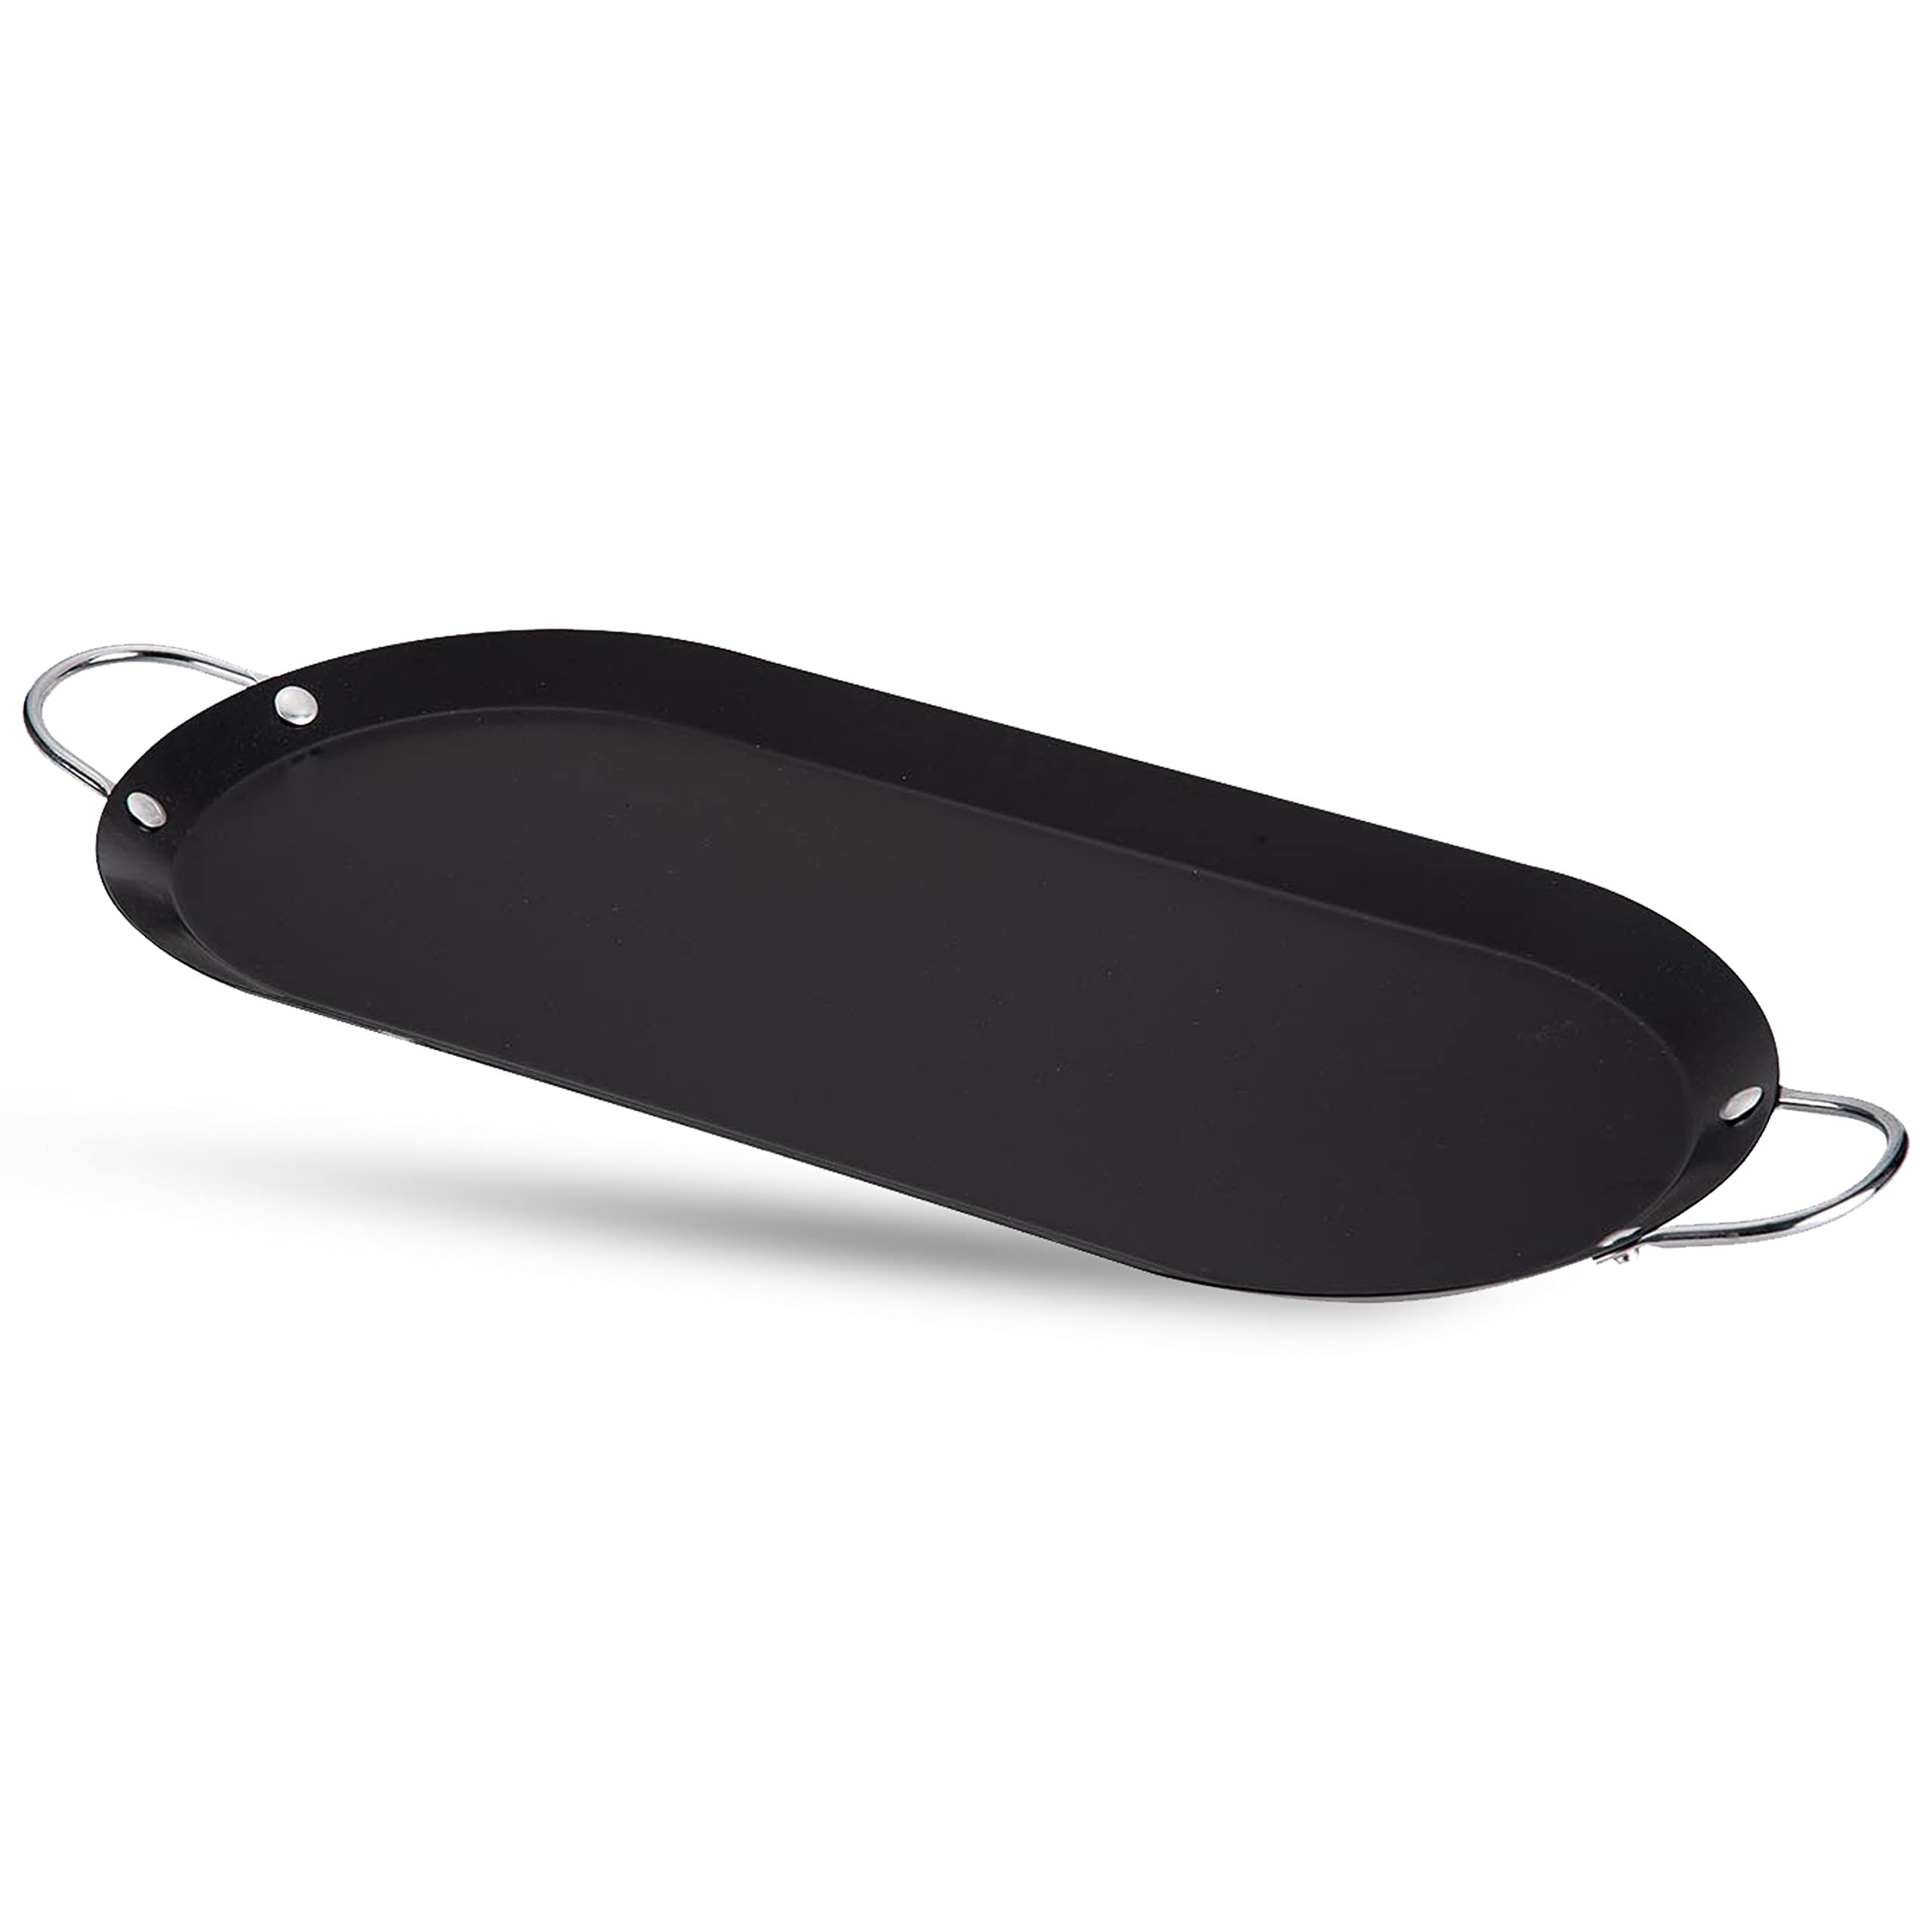 IMUSA 17 Carbon Steel Oval Shaped Comal/Griddle